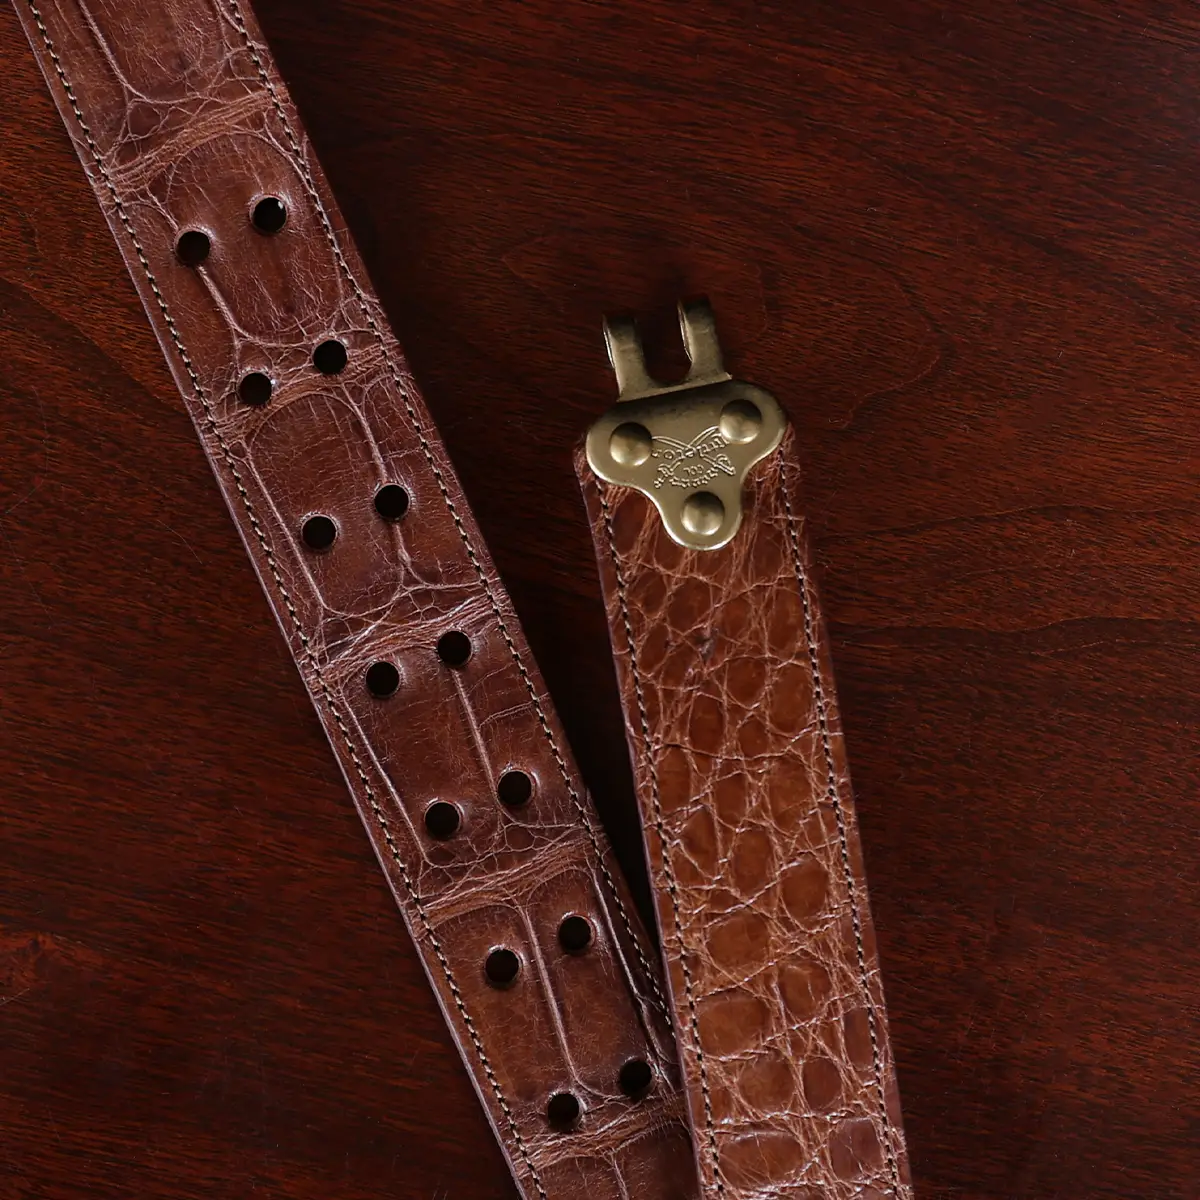 No. 5 Cinch Belt in brown American Alligator and brass buckle - ID 001 - unhooked view on black background